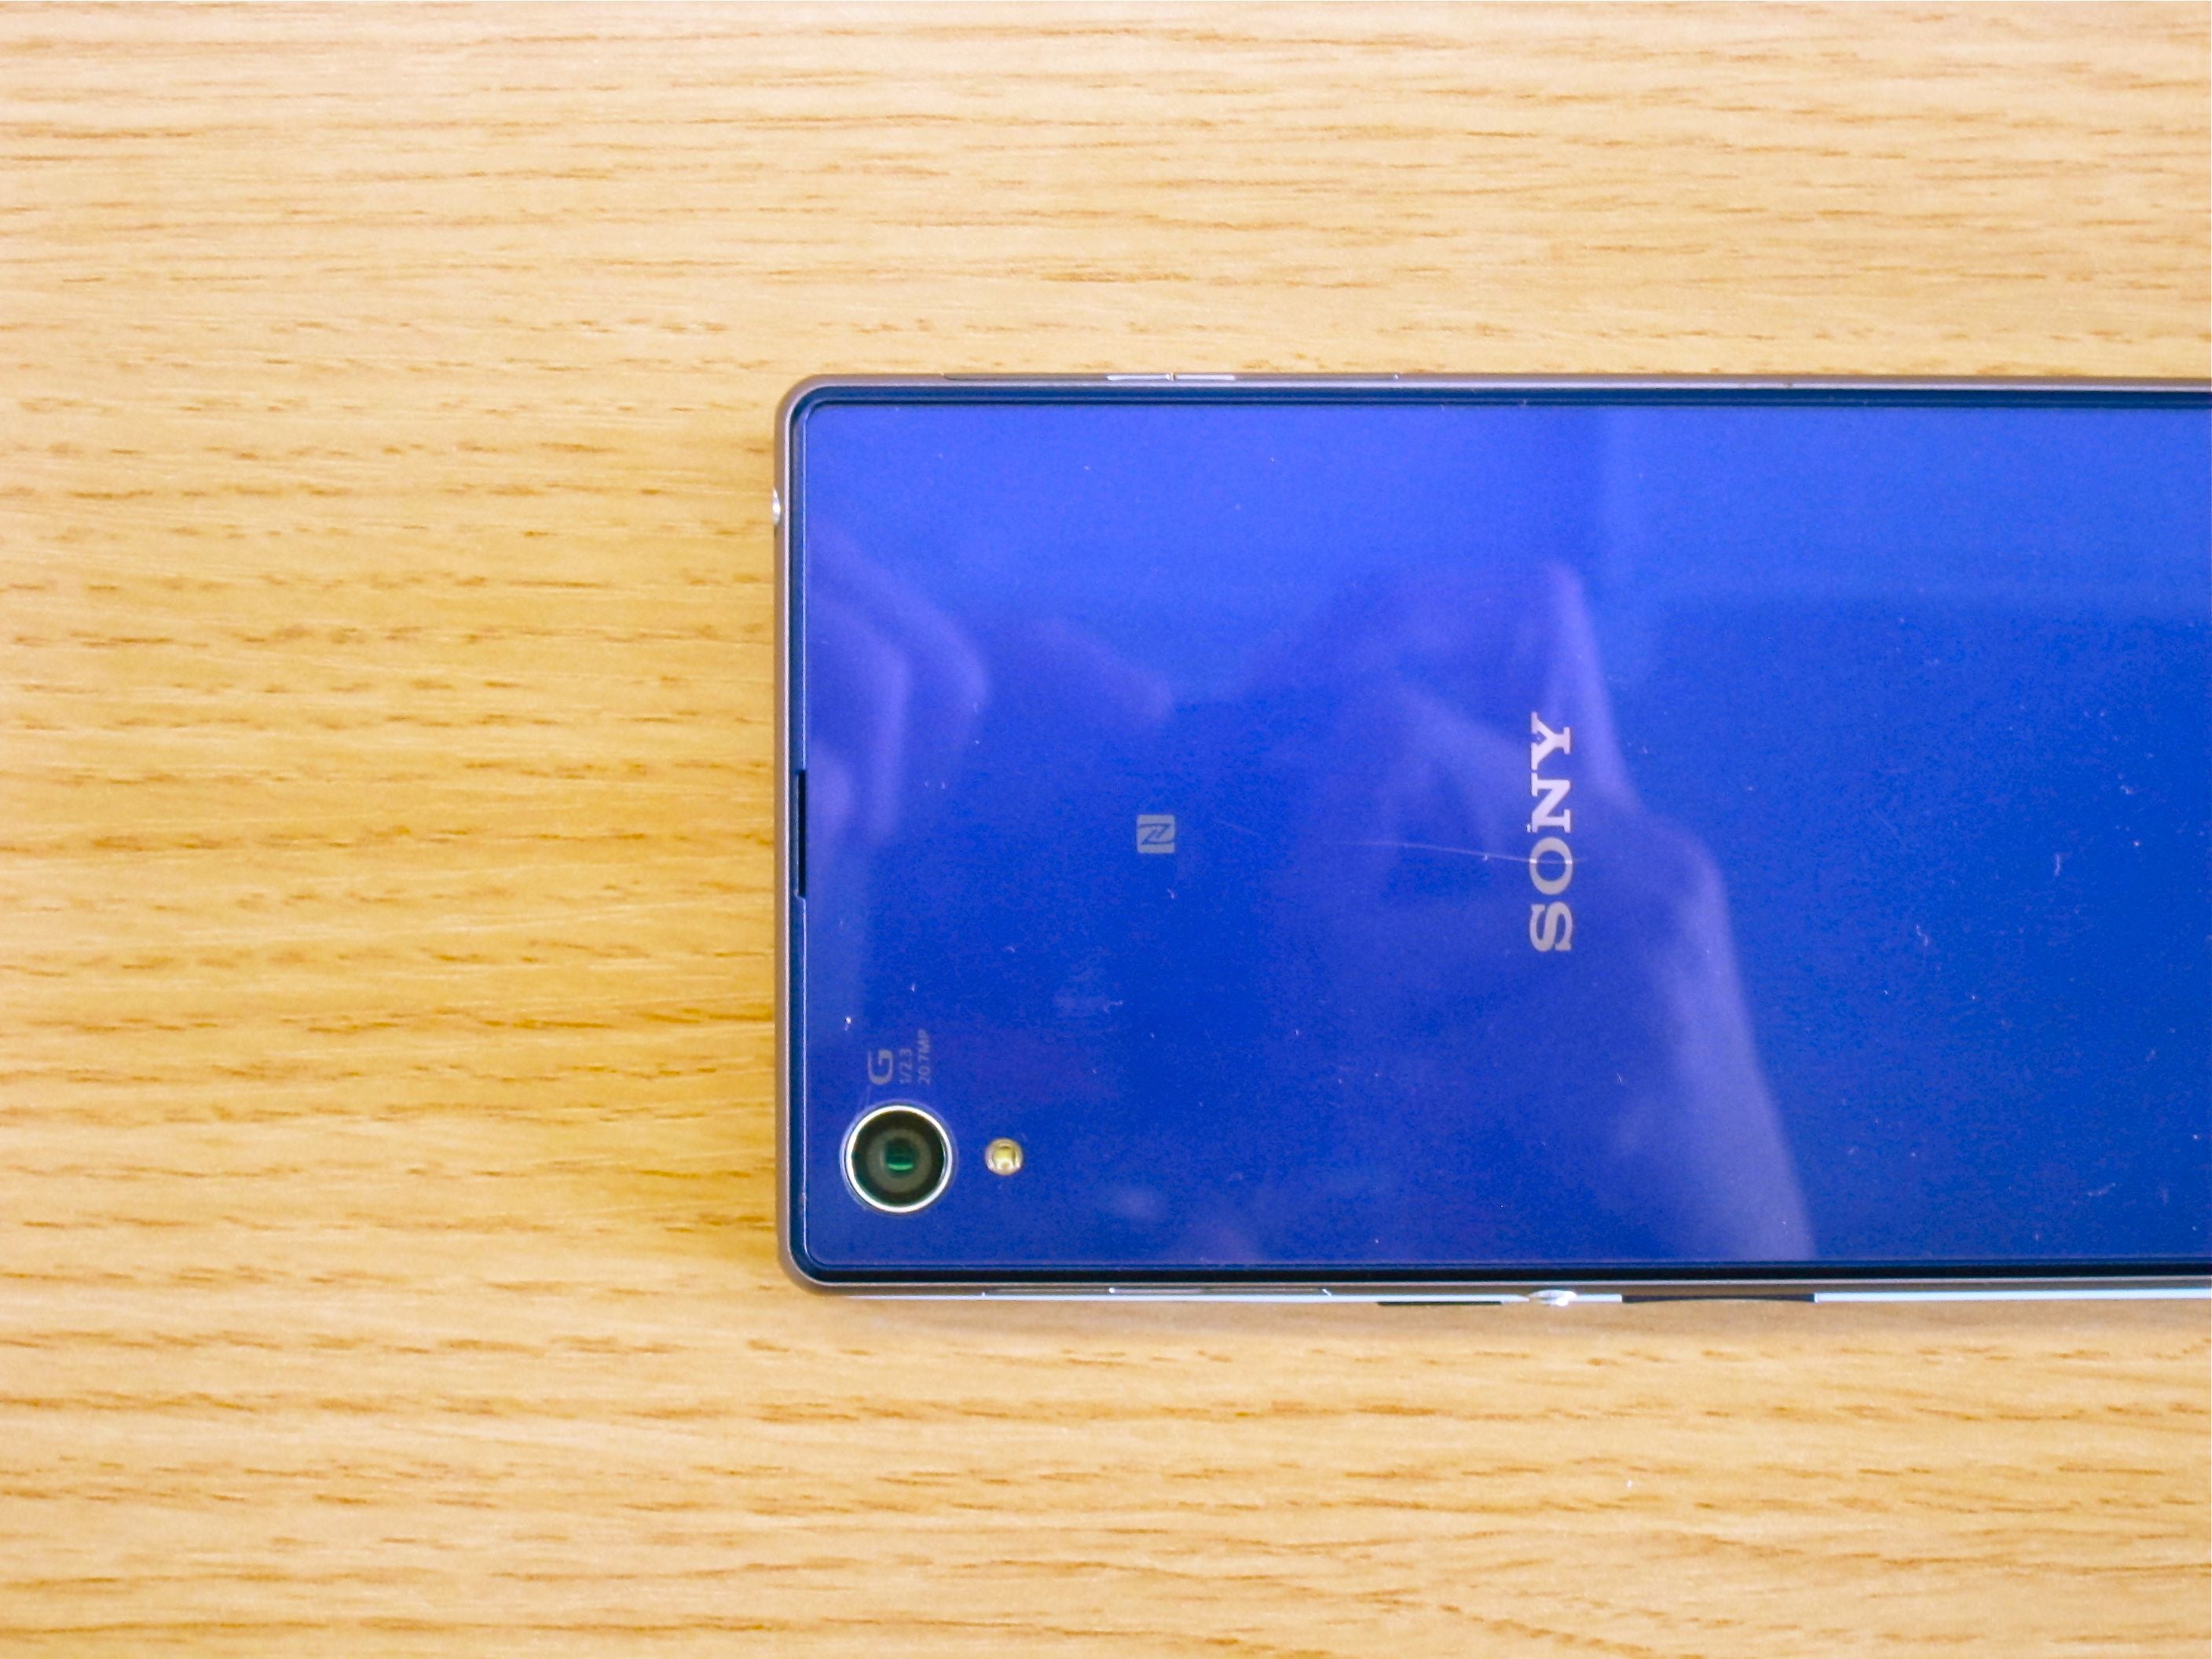 No mistake here -- there's a 5.5-inch OnePlus One unit underneath the Sony Xperia Z1 - The OnePlus One confirmed to have a 5.5-inch 1080p display, is still smaller than the Xperia Z1?